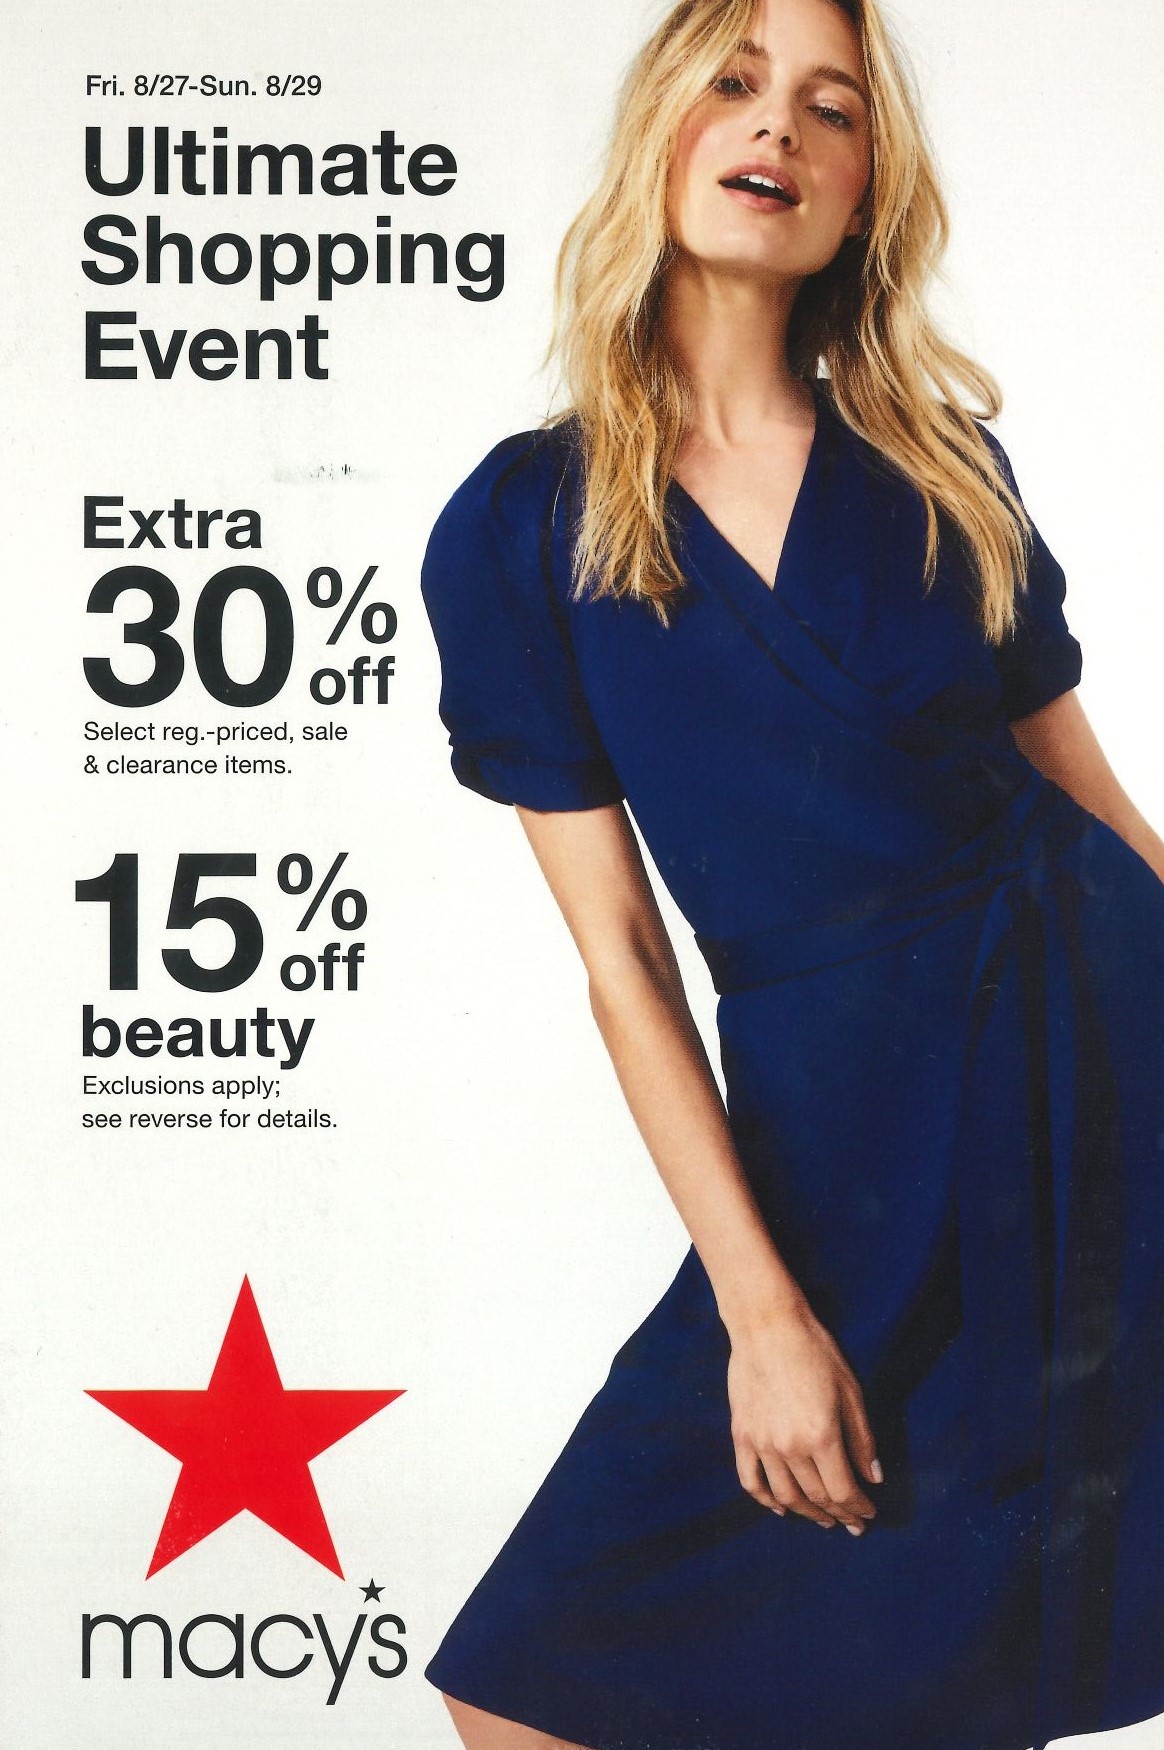 Macys Ultimate Shopping Event